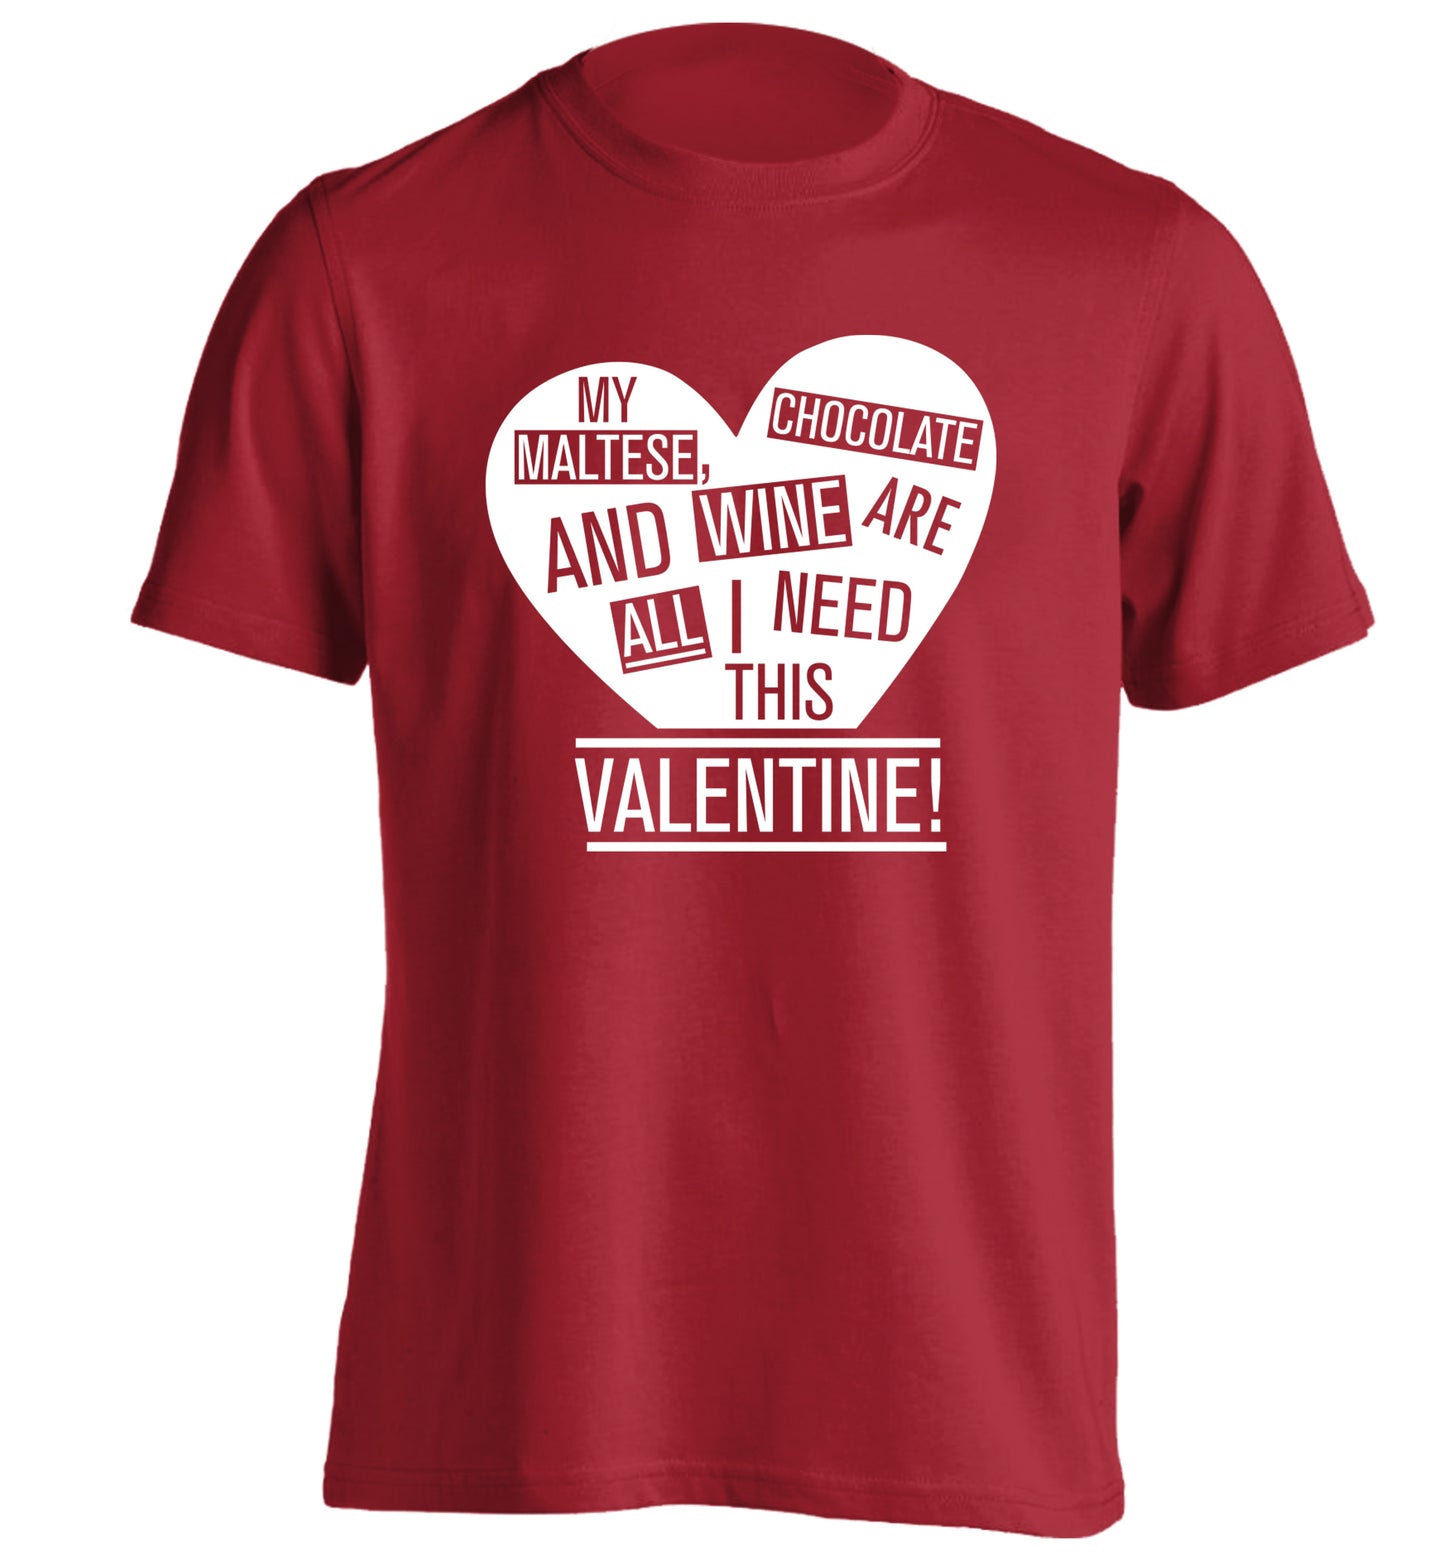 My maltese, chocolate and wine are all I need this valentine! adults unisex red Tshirt 2XL